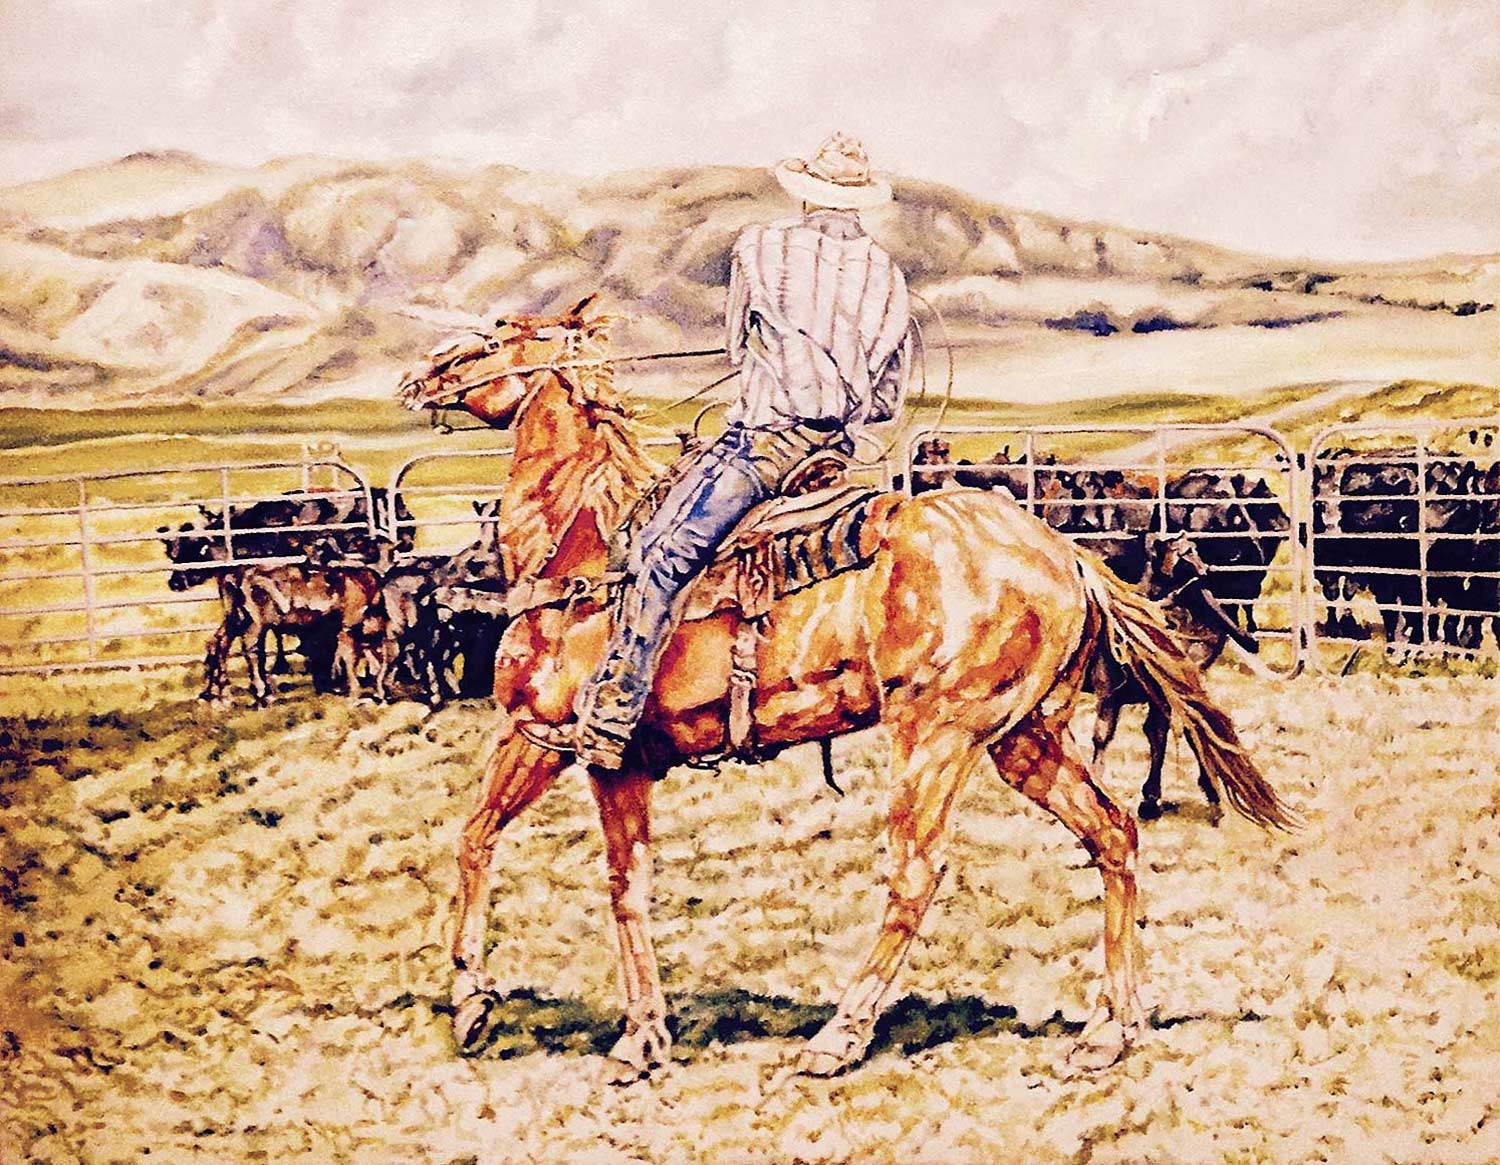 One of my ranch photos was used as the inspiration for this painting by Eddie Thiel.